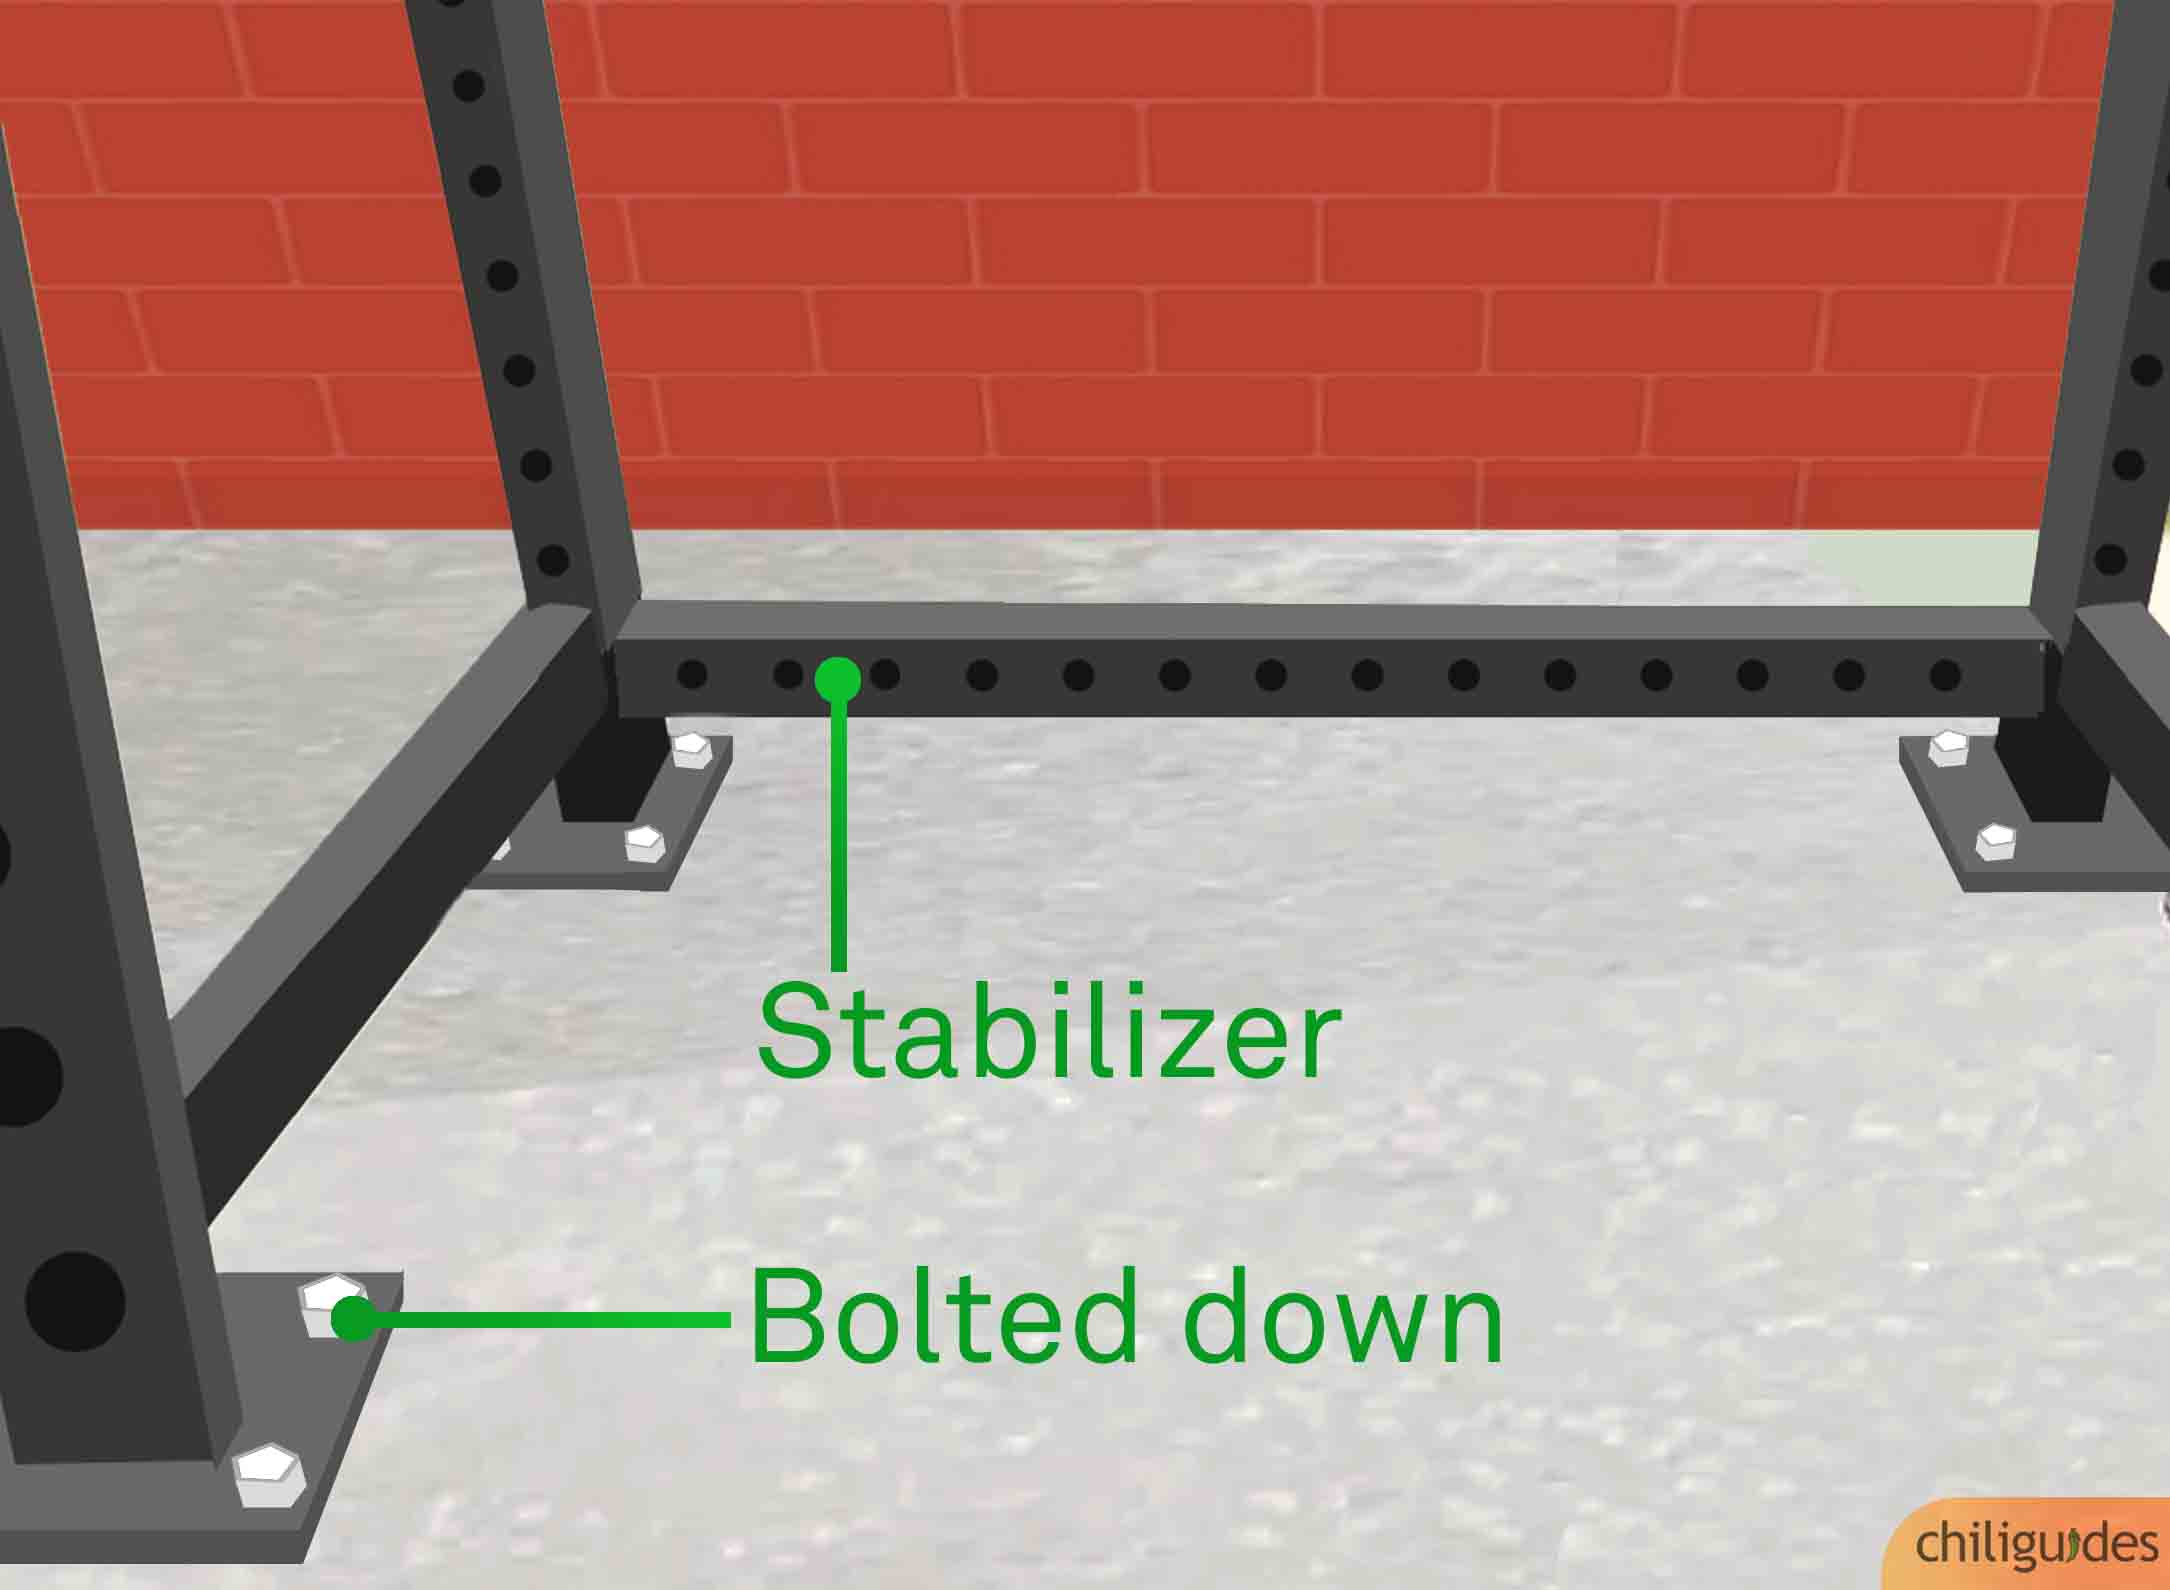 You must able to bolt the rack to the floor.